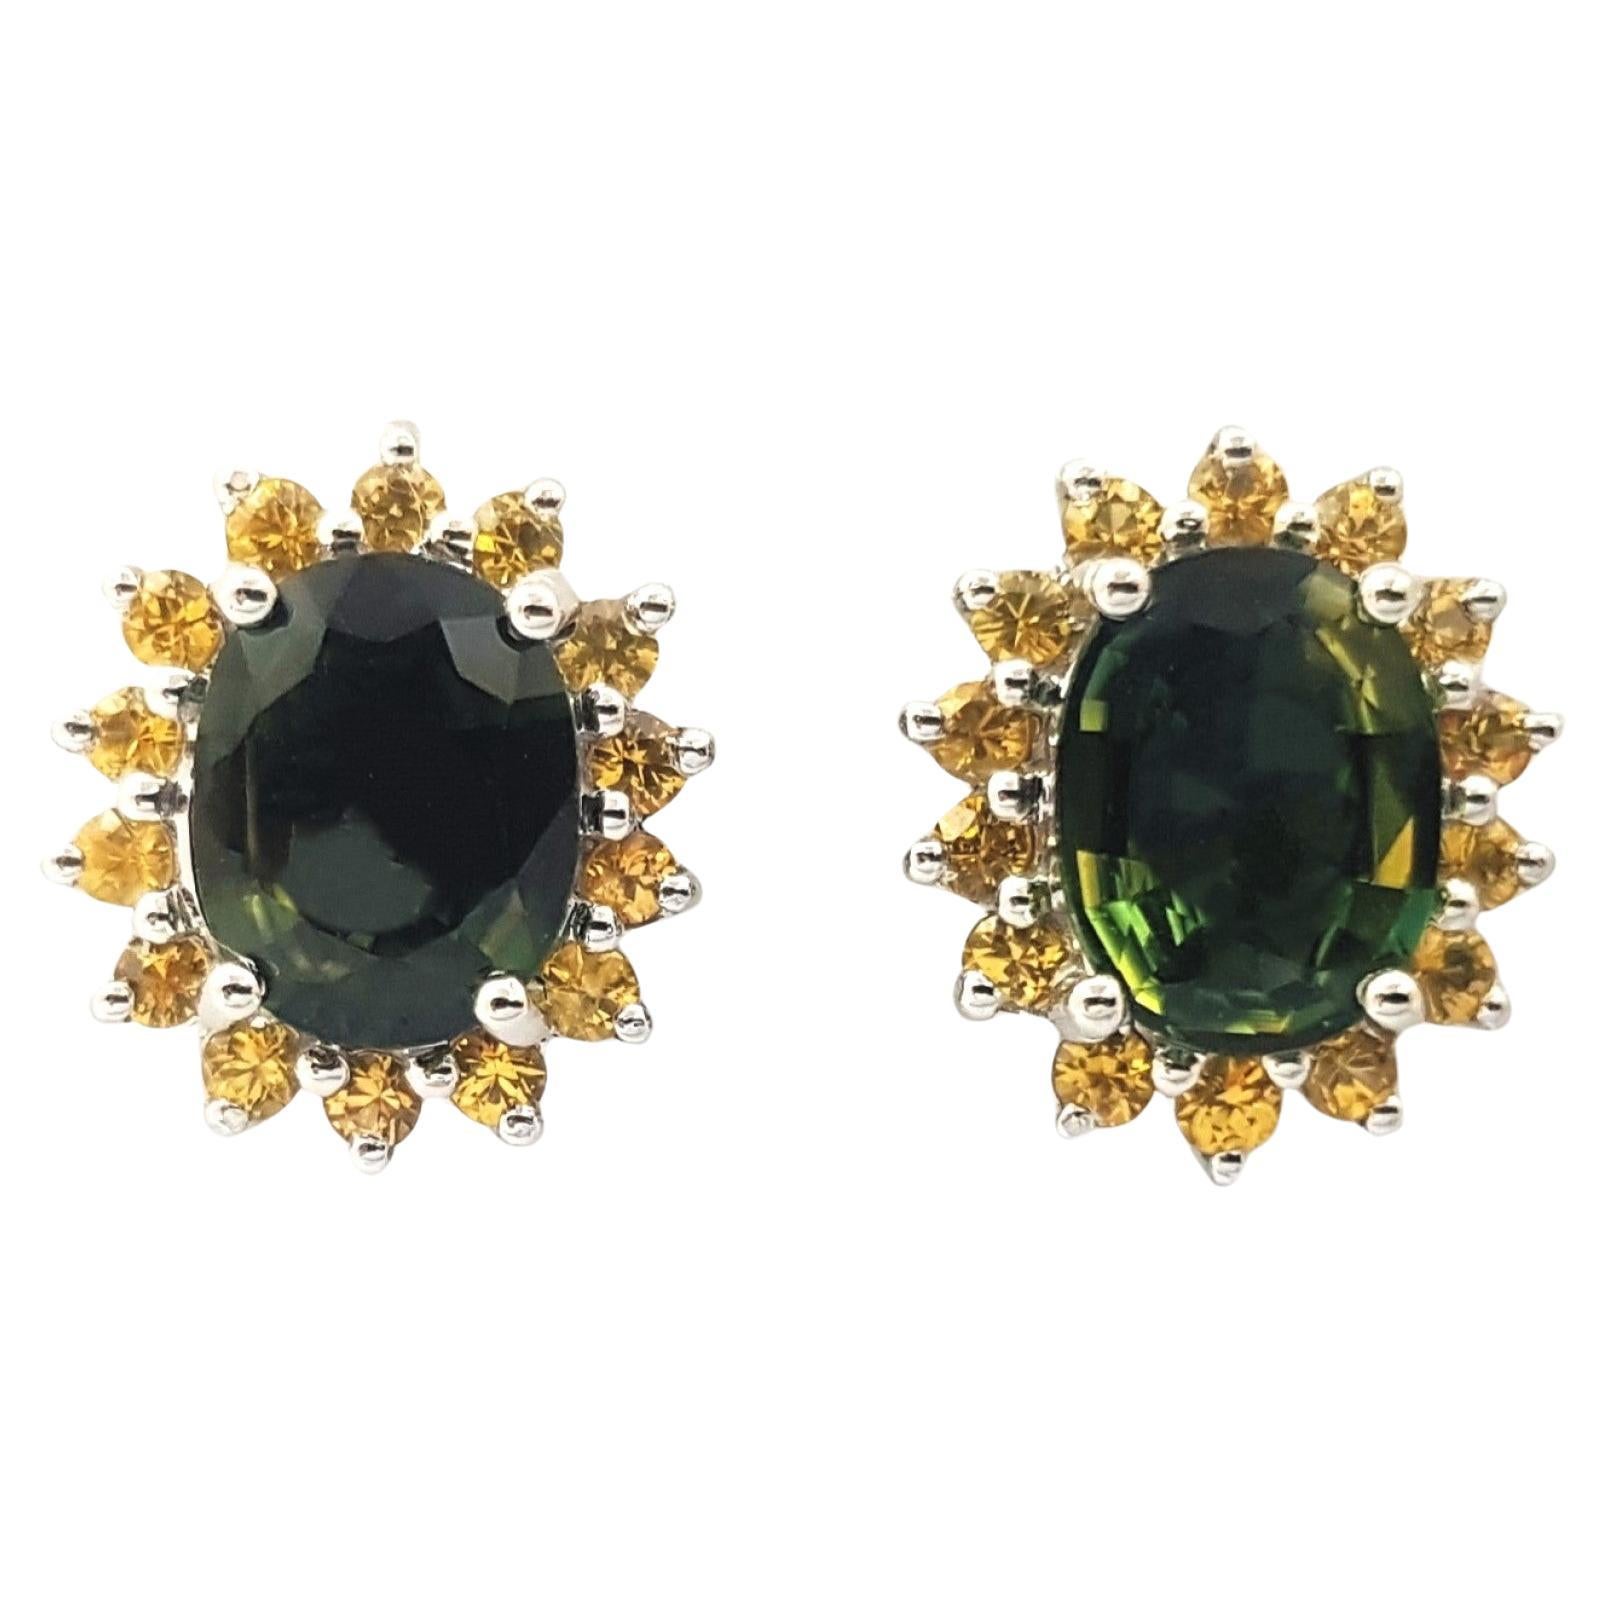 Green Sapphire with Yellow Sapphire Earrings set in 14K White Gold Settings